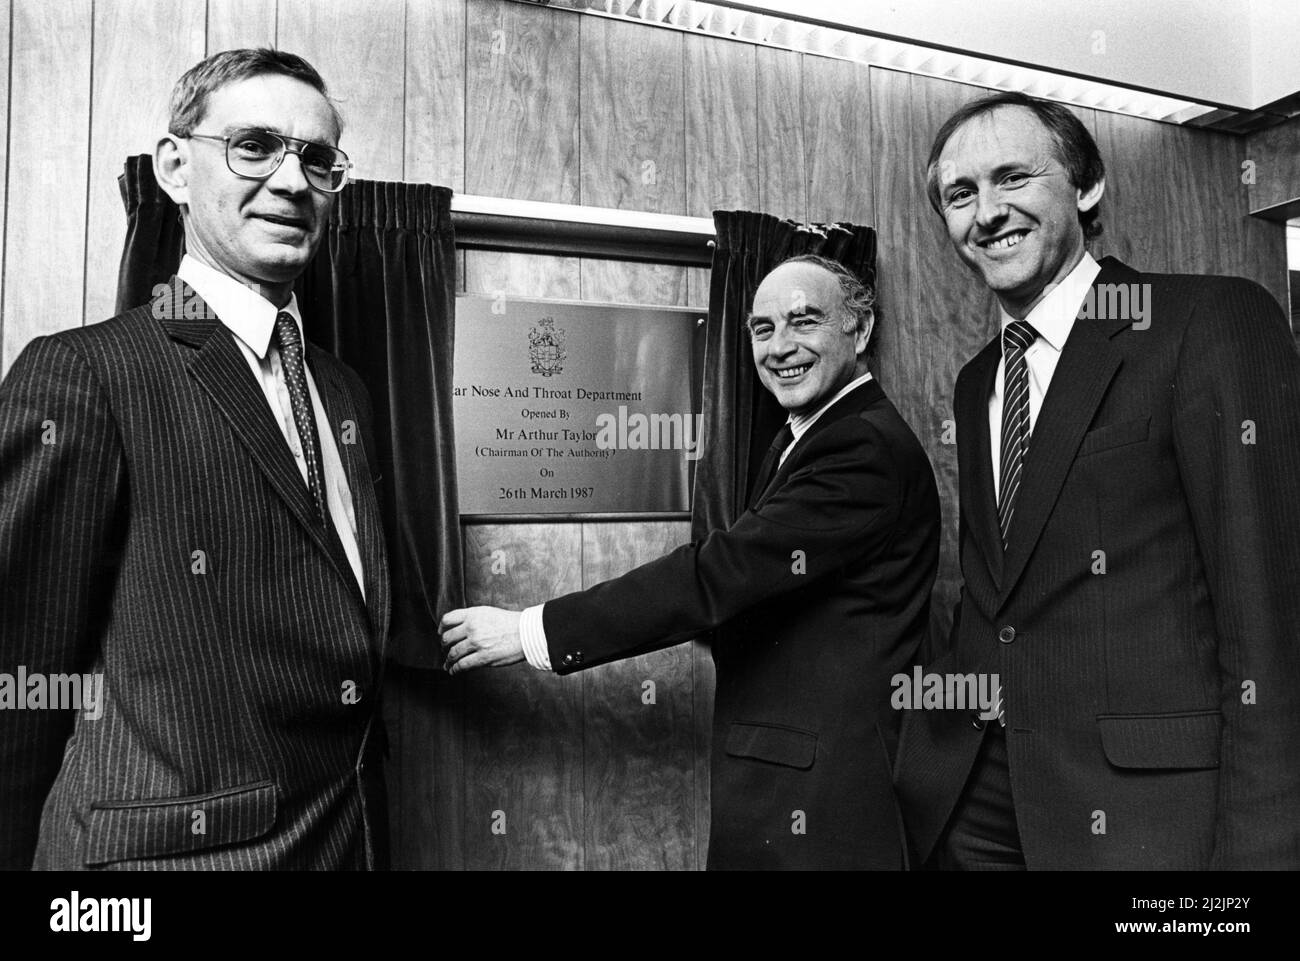 Arthur Taylor, the Chairman of Newcastle Health Authority unveils the plaque at the new ENT dept at the Freeman Hospital, watched by consultant David Kilbey (left) and hospital manager Len Fenwick. 26th March 1987. Stock Photo